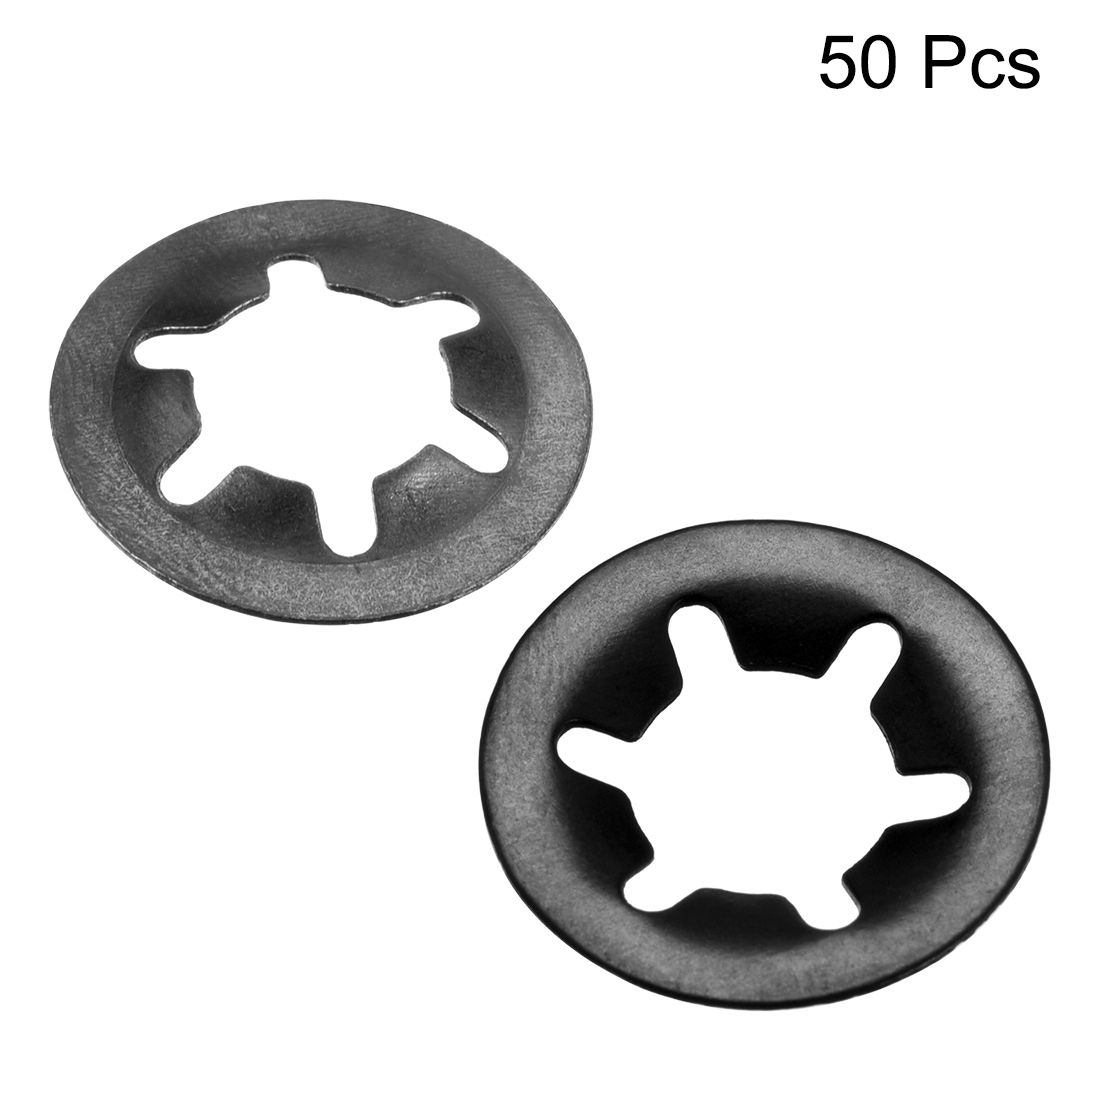 uxcell 100pcs M20 Carbon Steel External Lock Tab Spindle Washer for Round Slotted Nut